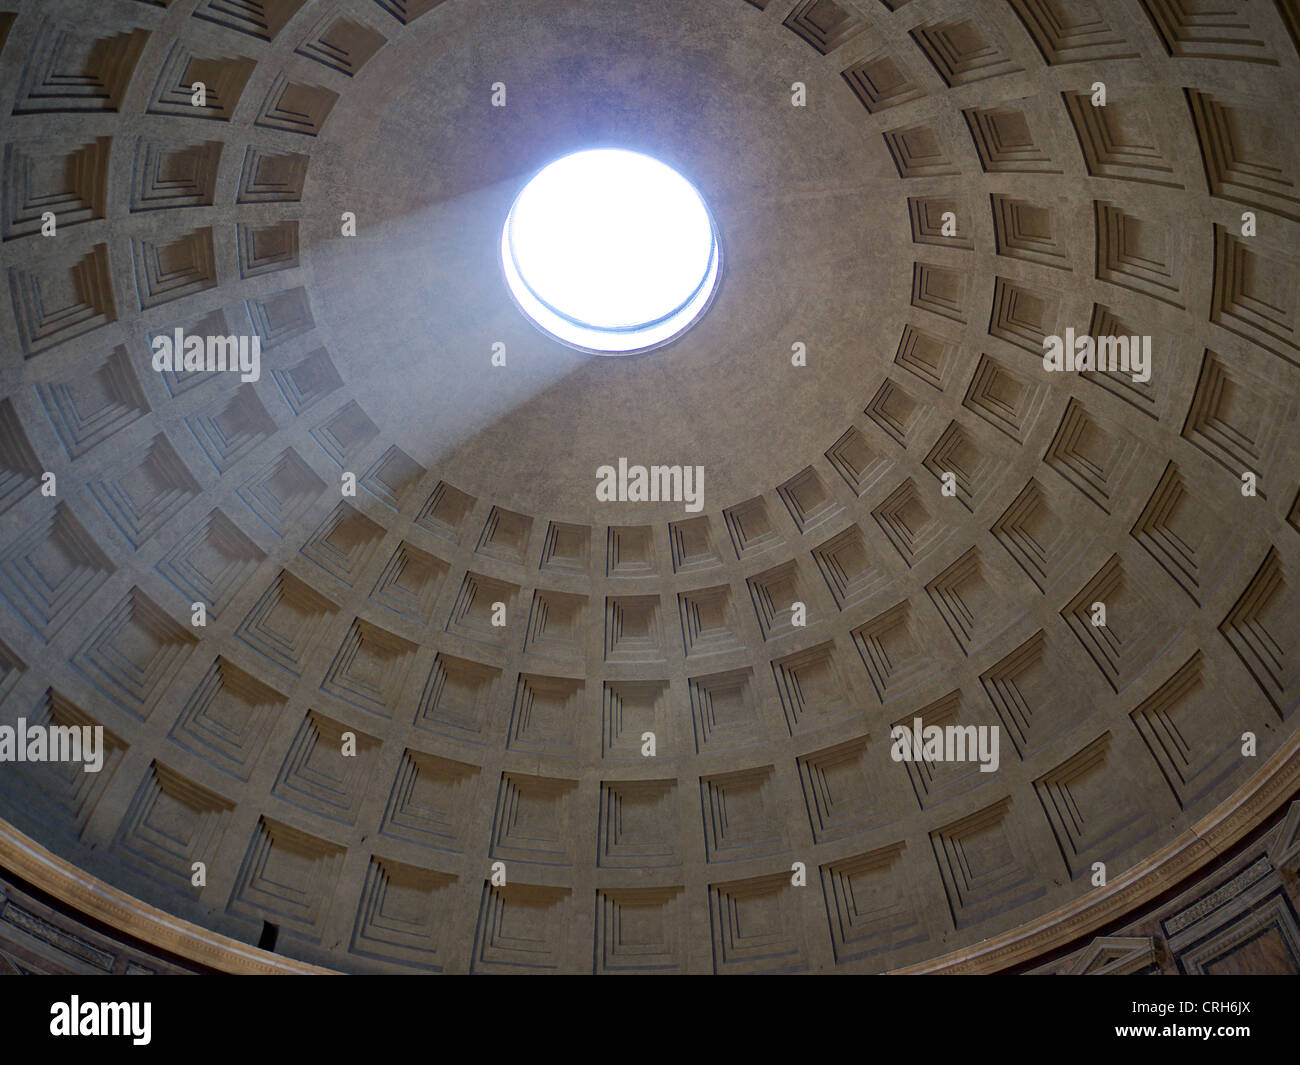 View of the interior of the Pantheon in Rome Italy with a shaft of light entering via the Oculus Stock Photo